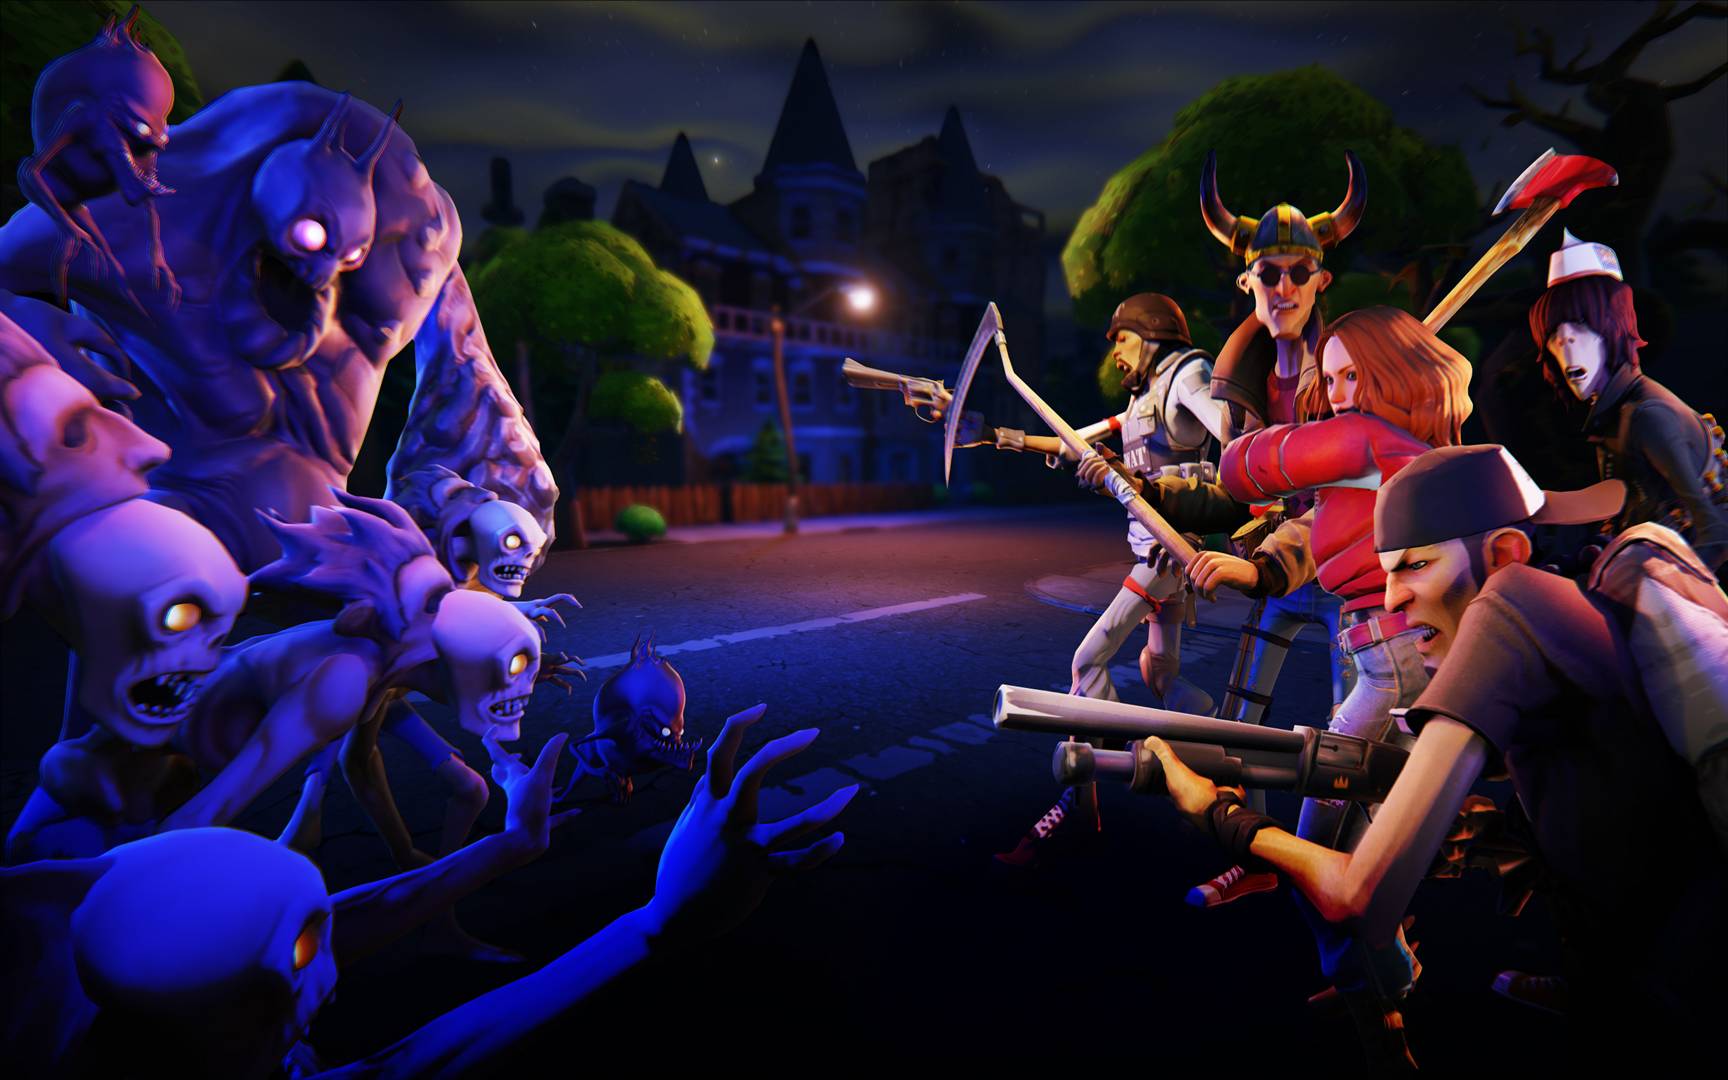 77 Epic Gaming Wallpapers On Wallpapersafari The developer supported, community run subreddit dedicated to the fortnite: epic gaming wallpapers on wallpapersafari